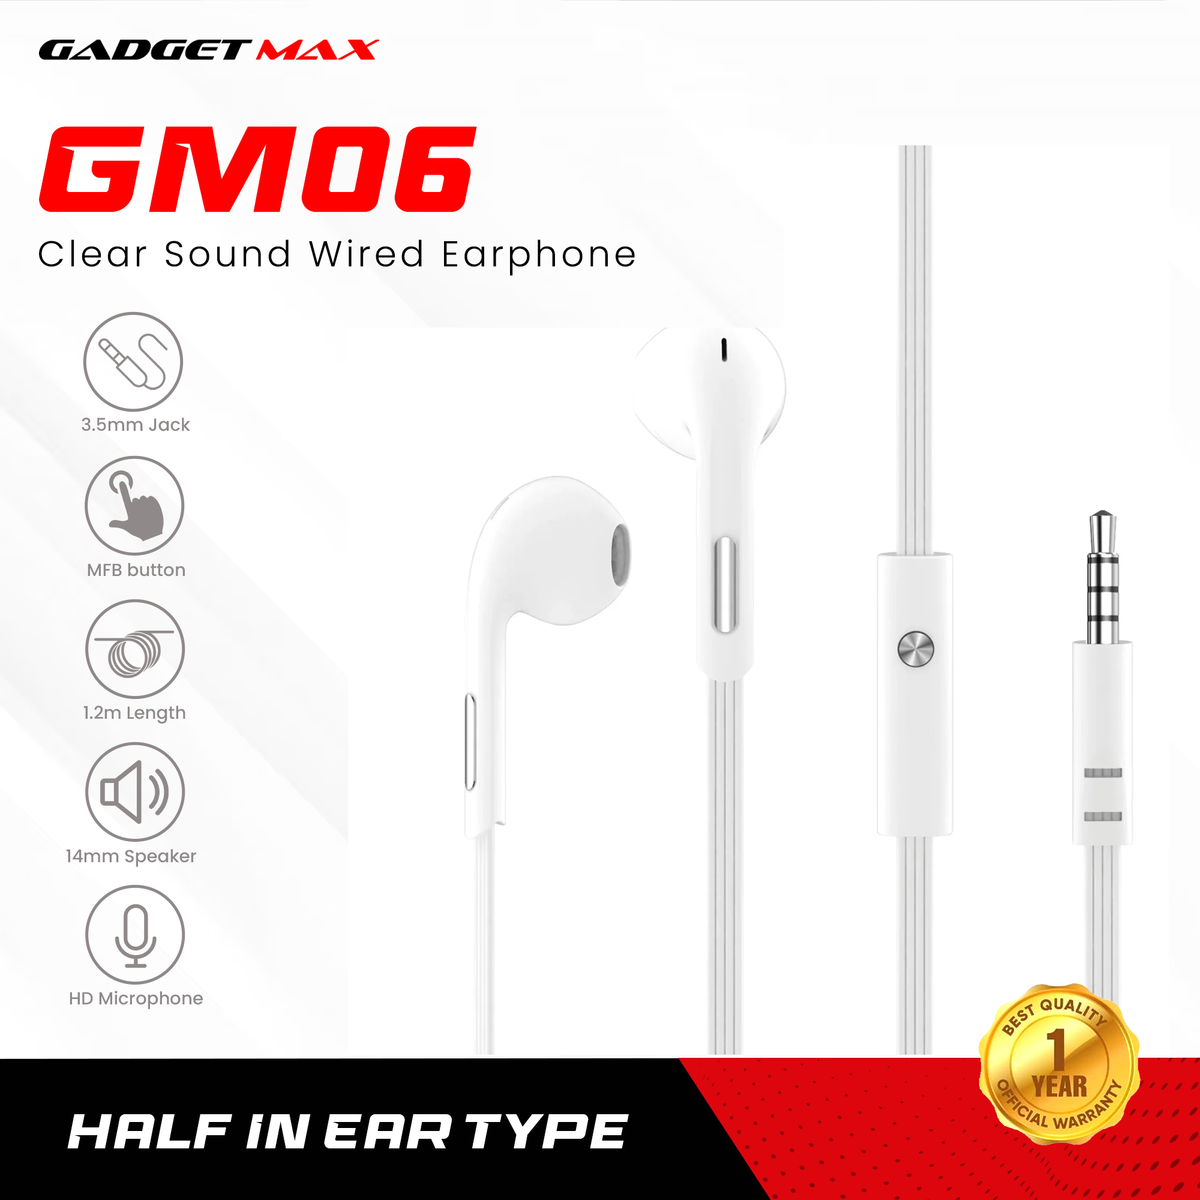 GADGET MAX GM06 CLEAR SOUND WIRED 3.5MM EARPHONE WITH MIC (1.2M) - WHITE